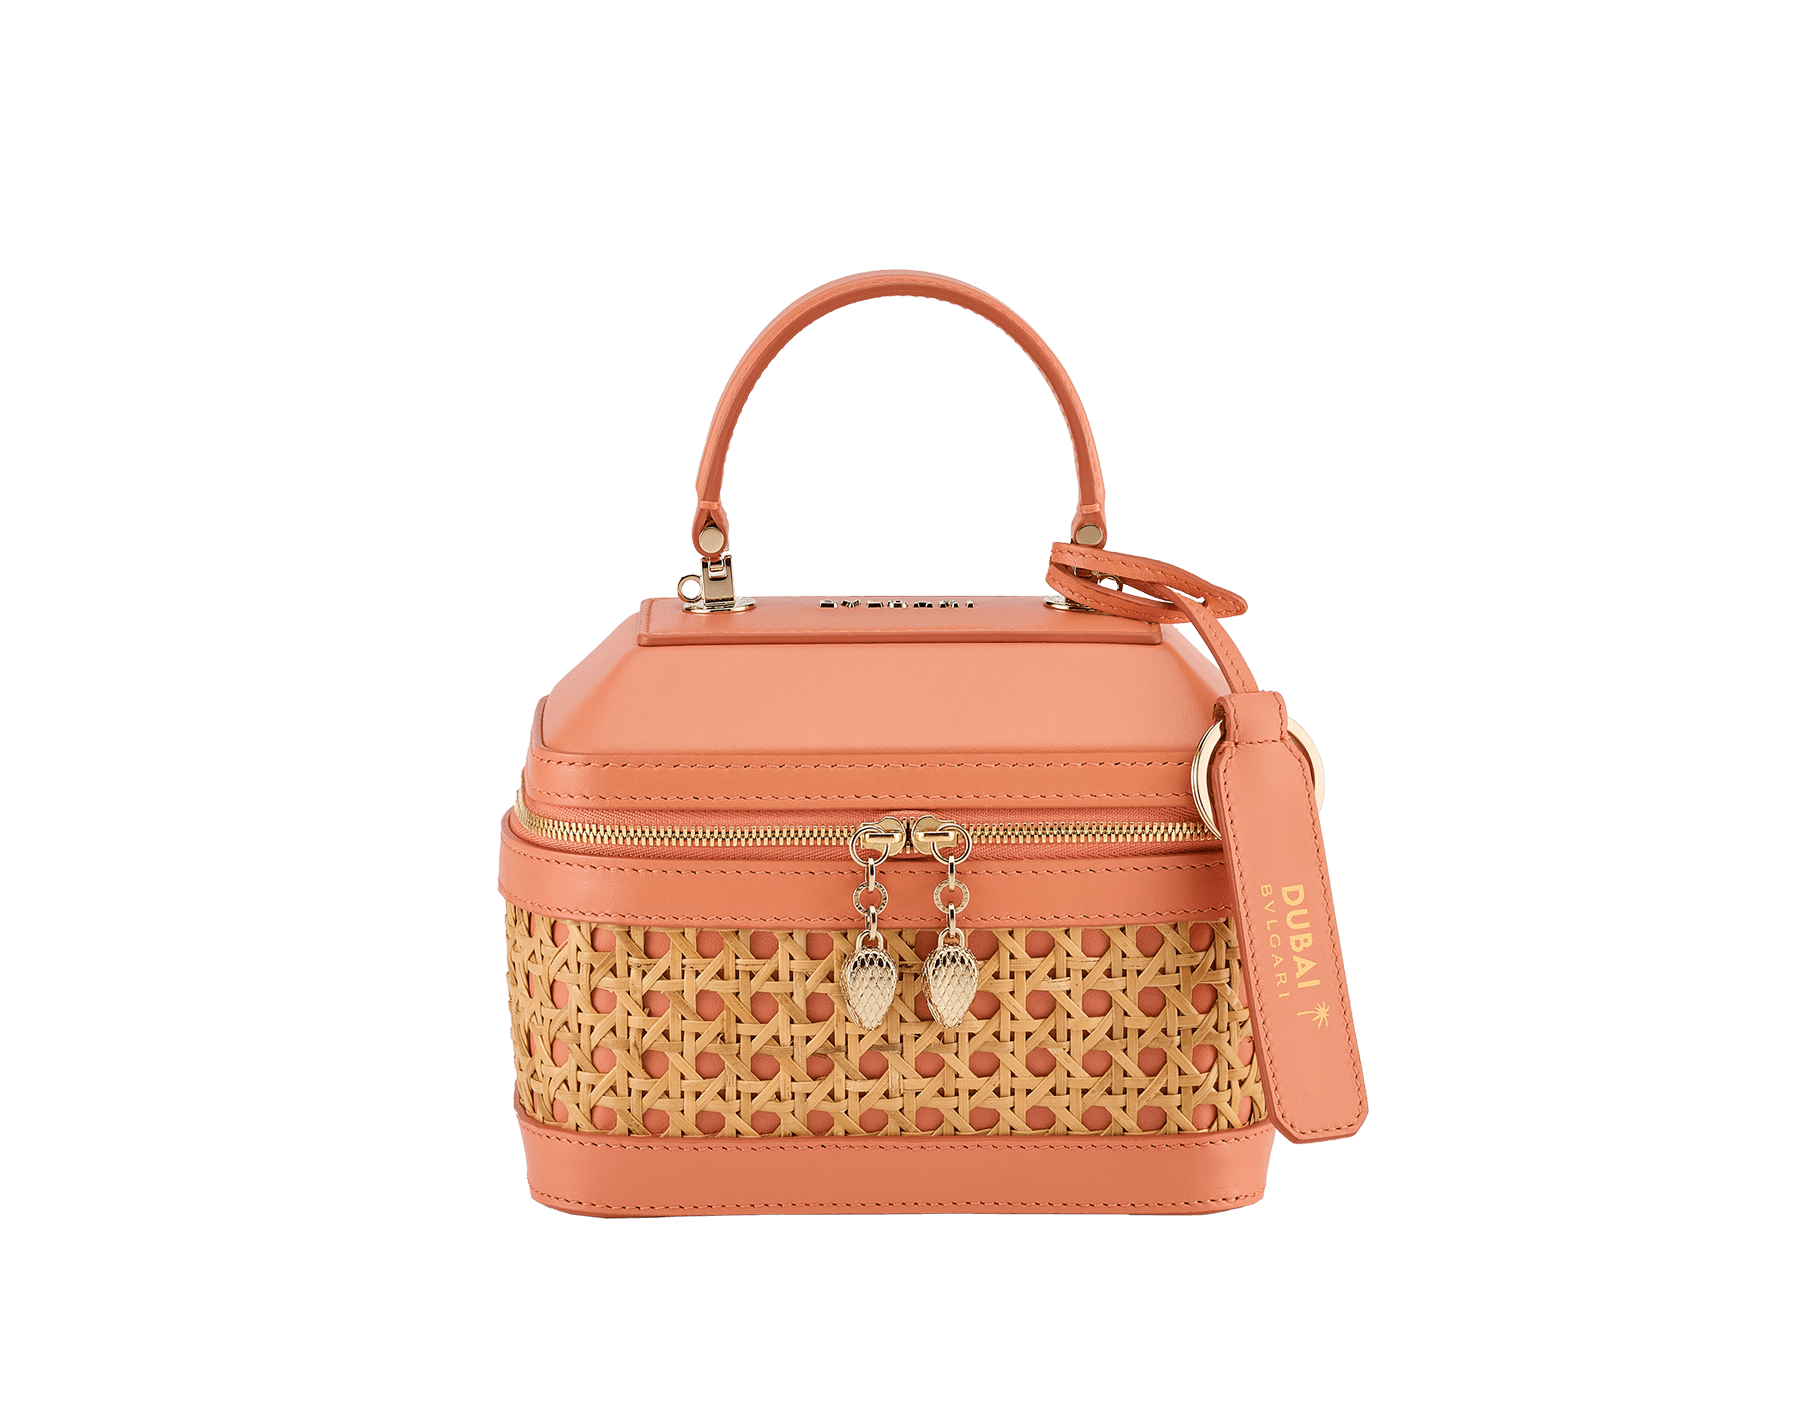 Serpenti Forever small jewellery box bag in natural Vienna straw with coral carnelian orange calf leather details and customisable tag with hot stamped "Dubai" inscription on one side, and beetroot spinel fuchsia nappa leather lining. Captivating snakehead zip pullers and chain strap décor in light gold-plated brass. Special Resort Edition exclusive to Dubai. 292476 image 1